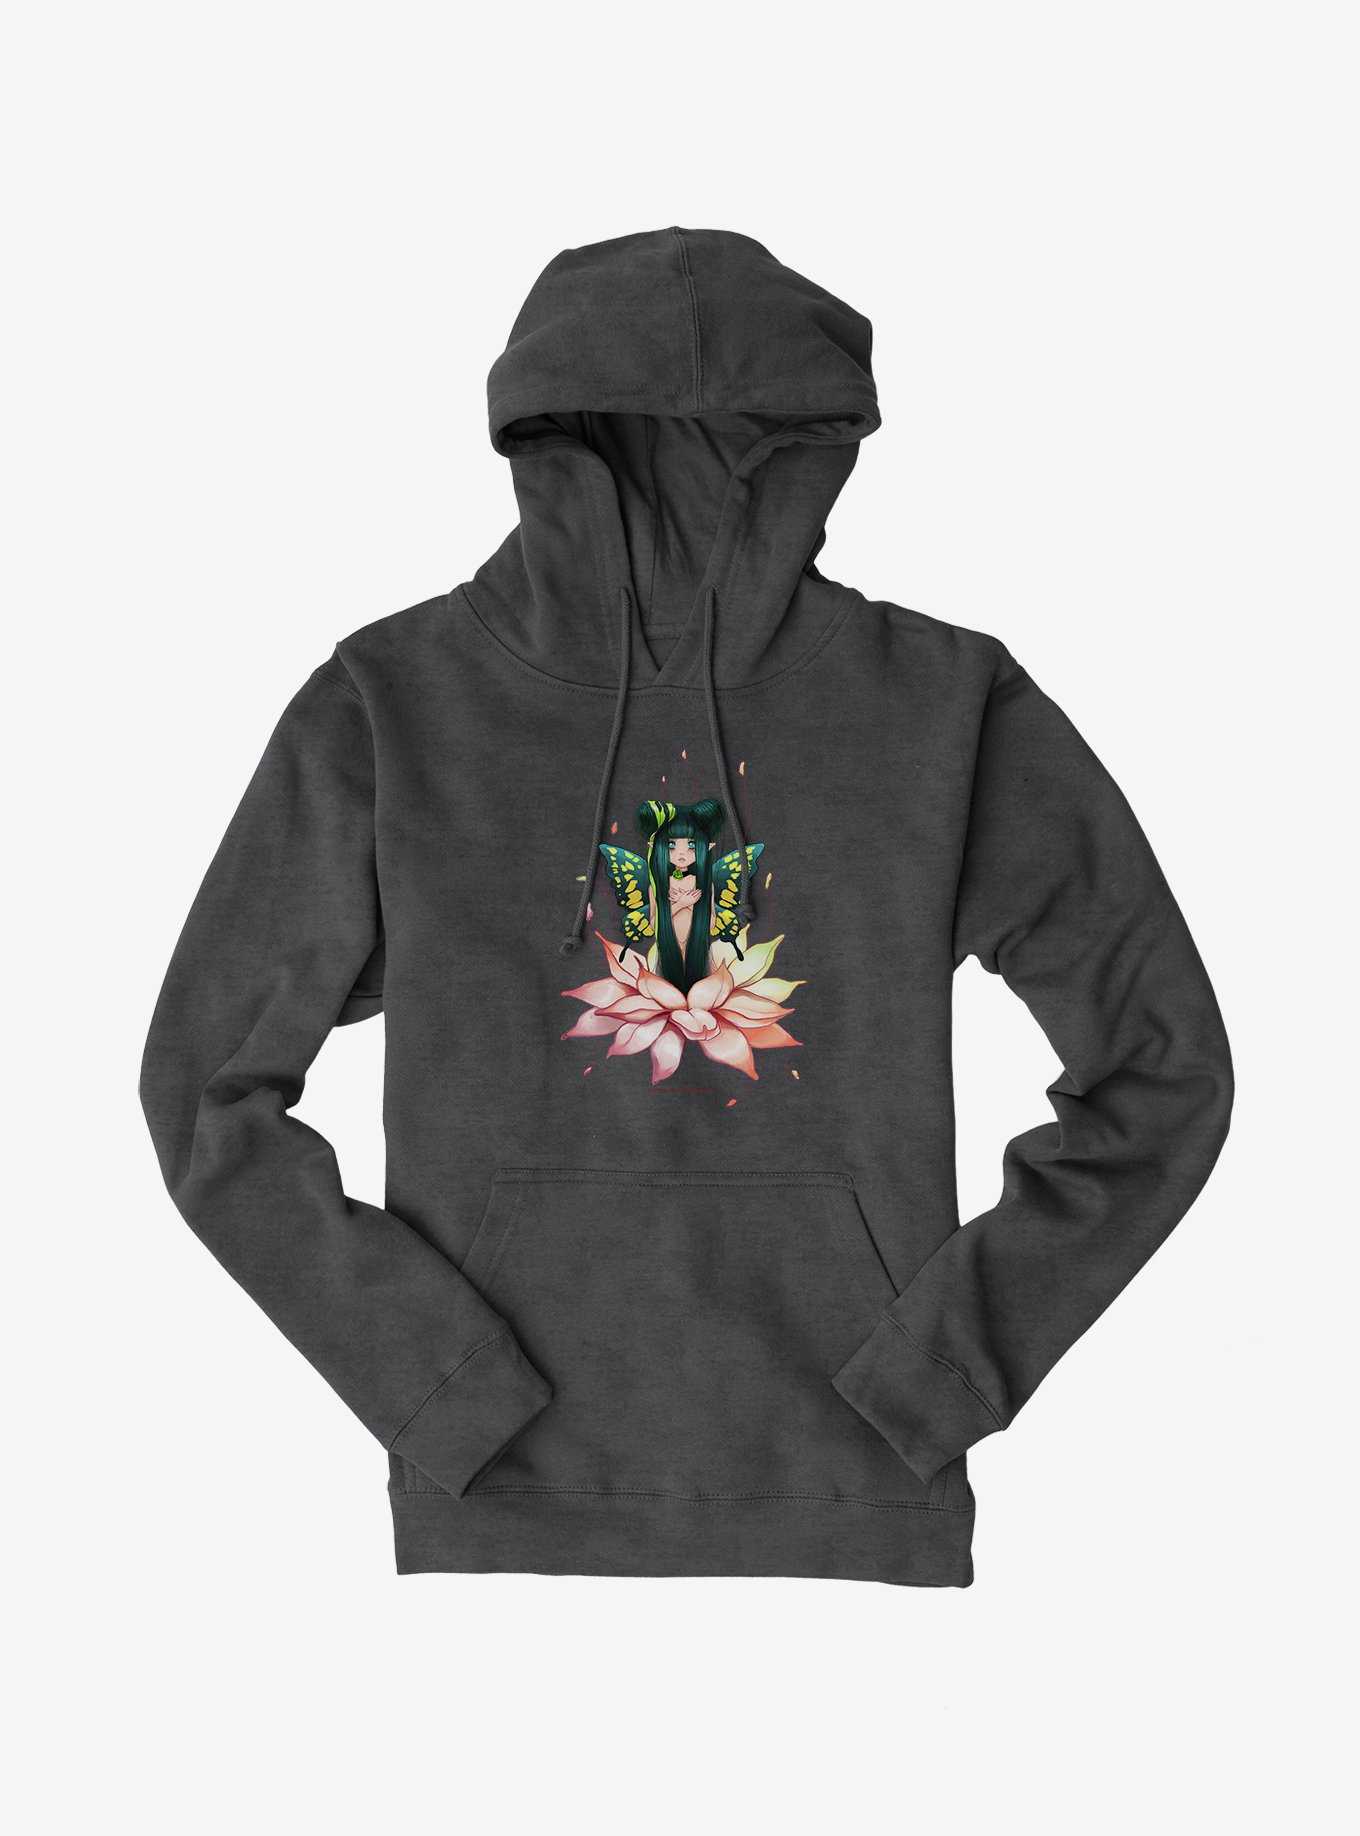 Fairies By Trick Space Buns Fairy Hoodie, CHARCOAL HEATHER, hi-res